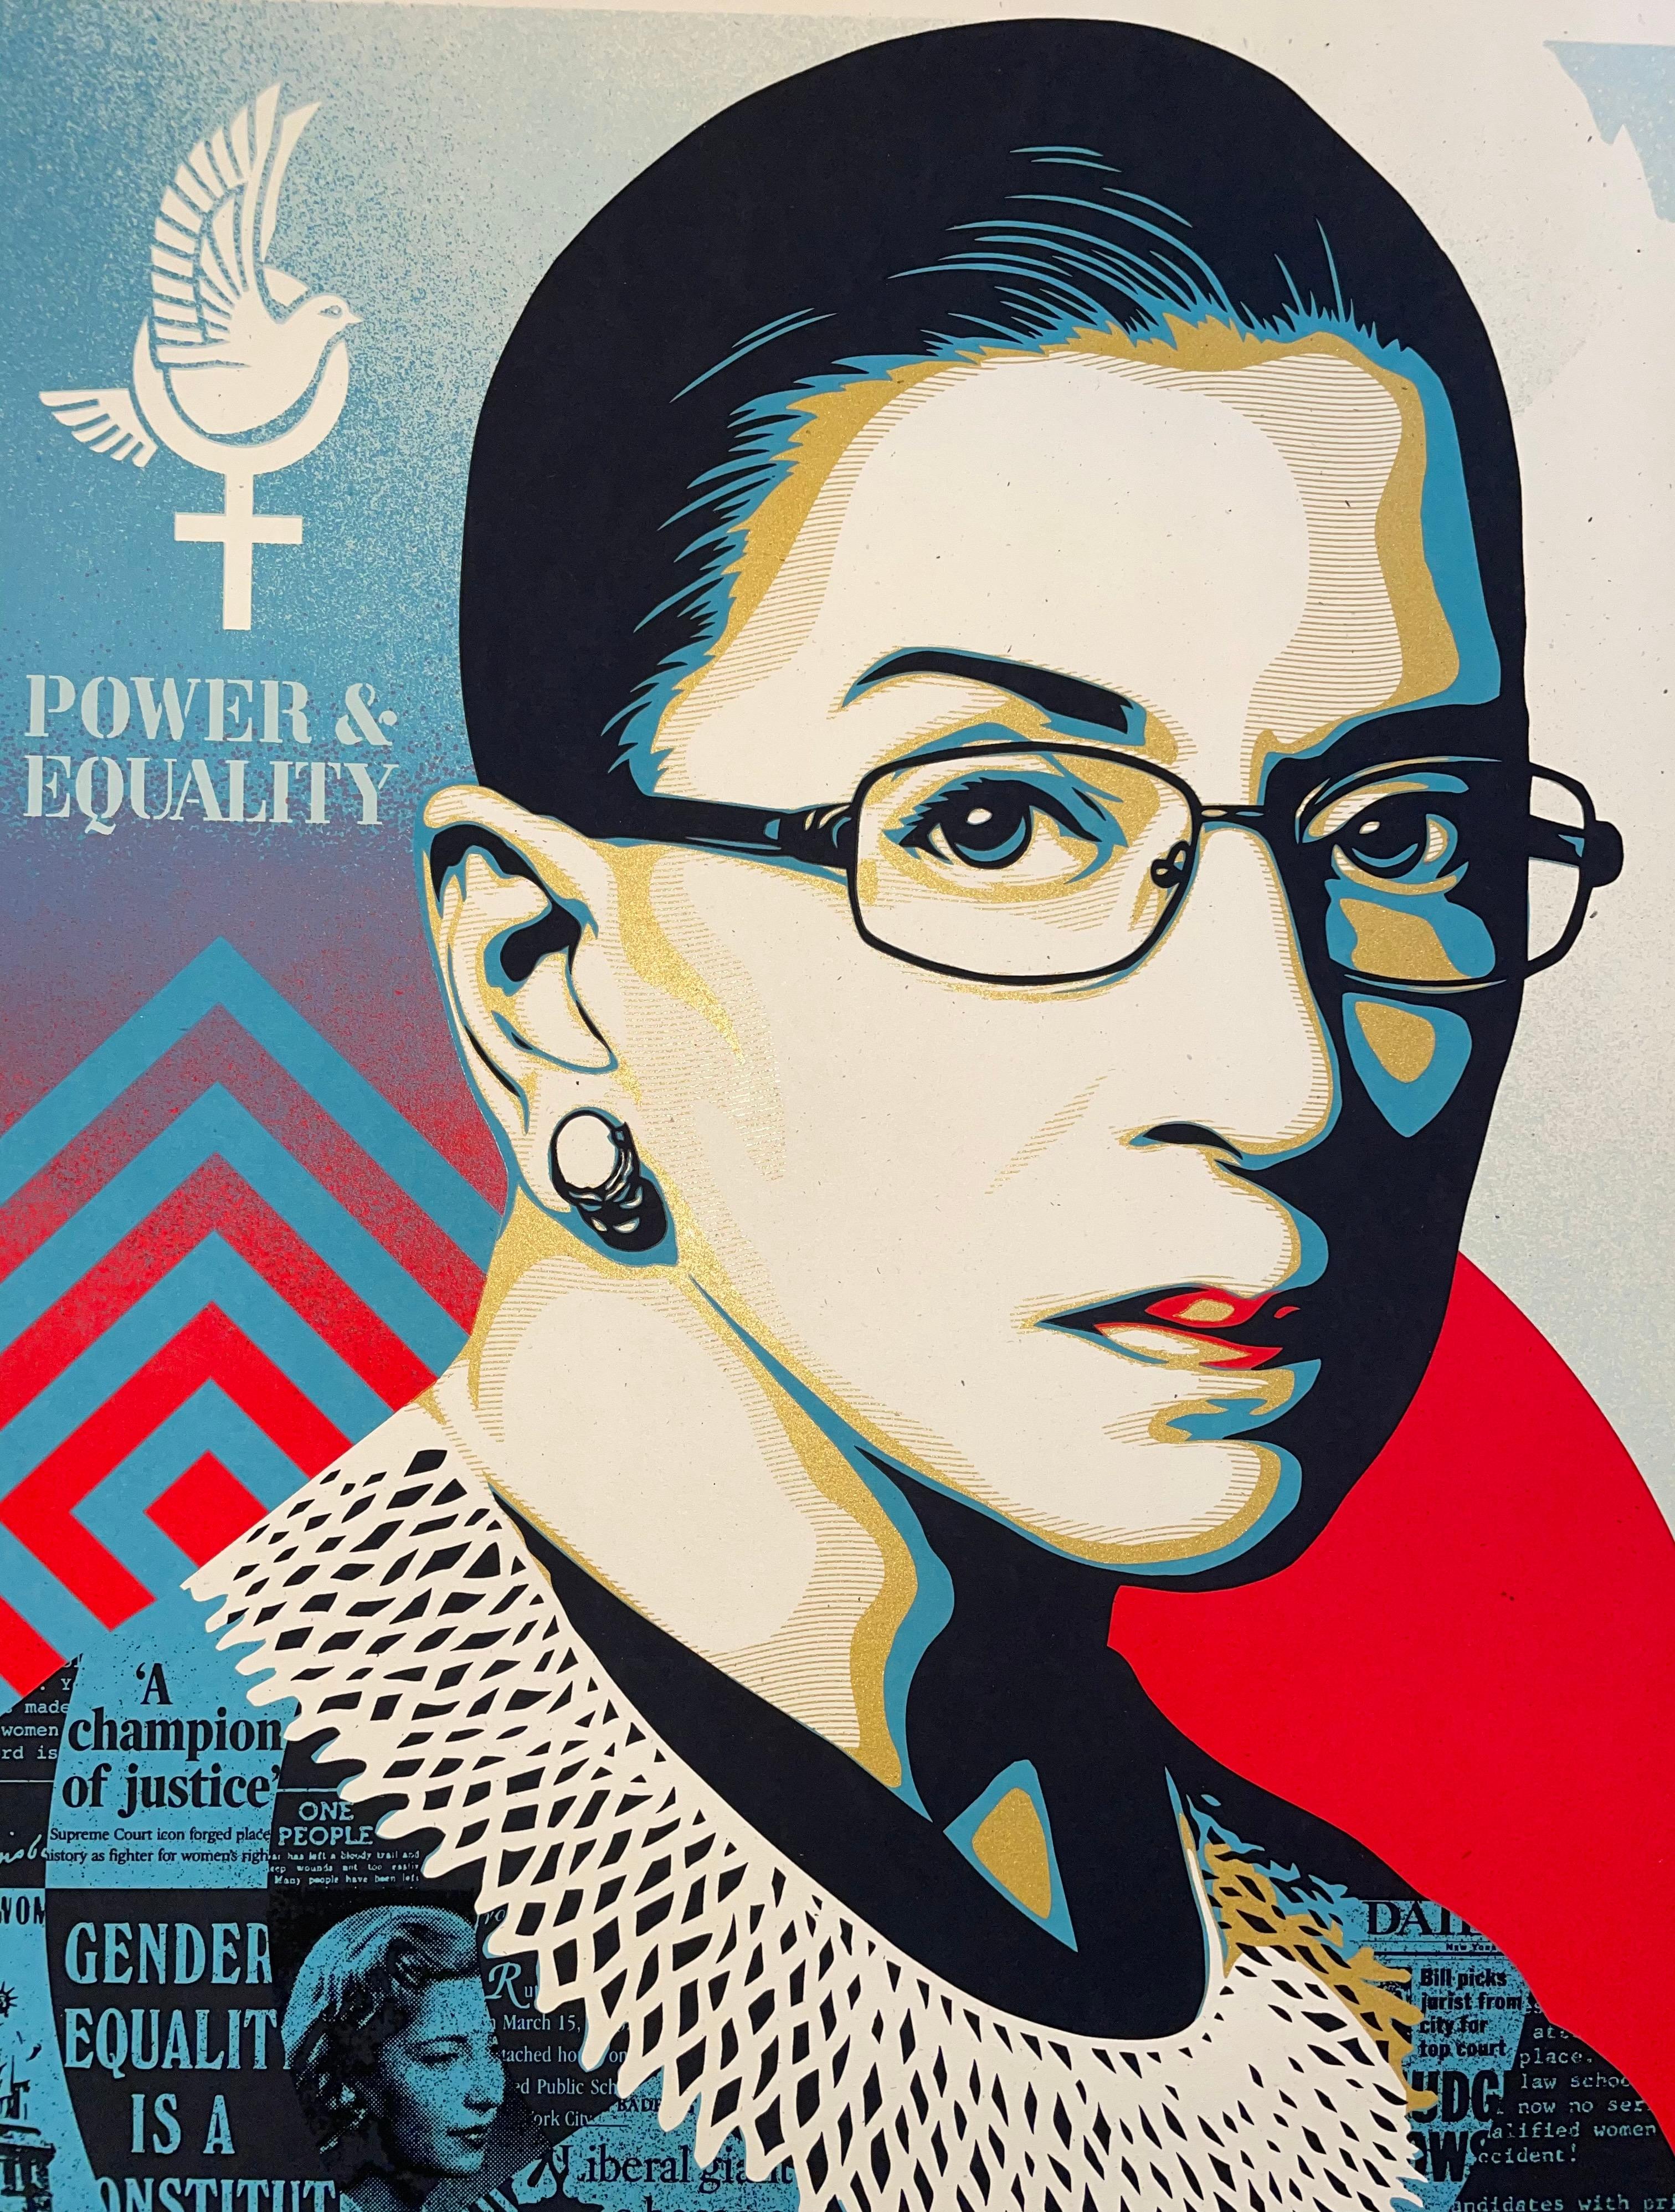 Original Photo by Ruven Afanador.

"Ruth Bader Ginsburg is a hero of mine because she was a low-key radical. She encountered gender discrimination in her personal life which she overcame with perseverance and professional excellence, allowing her to